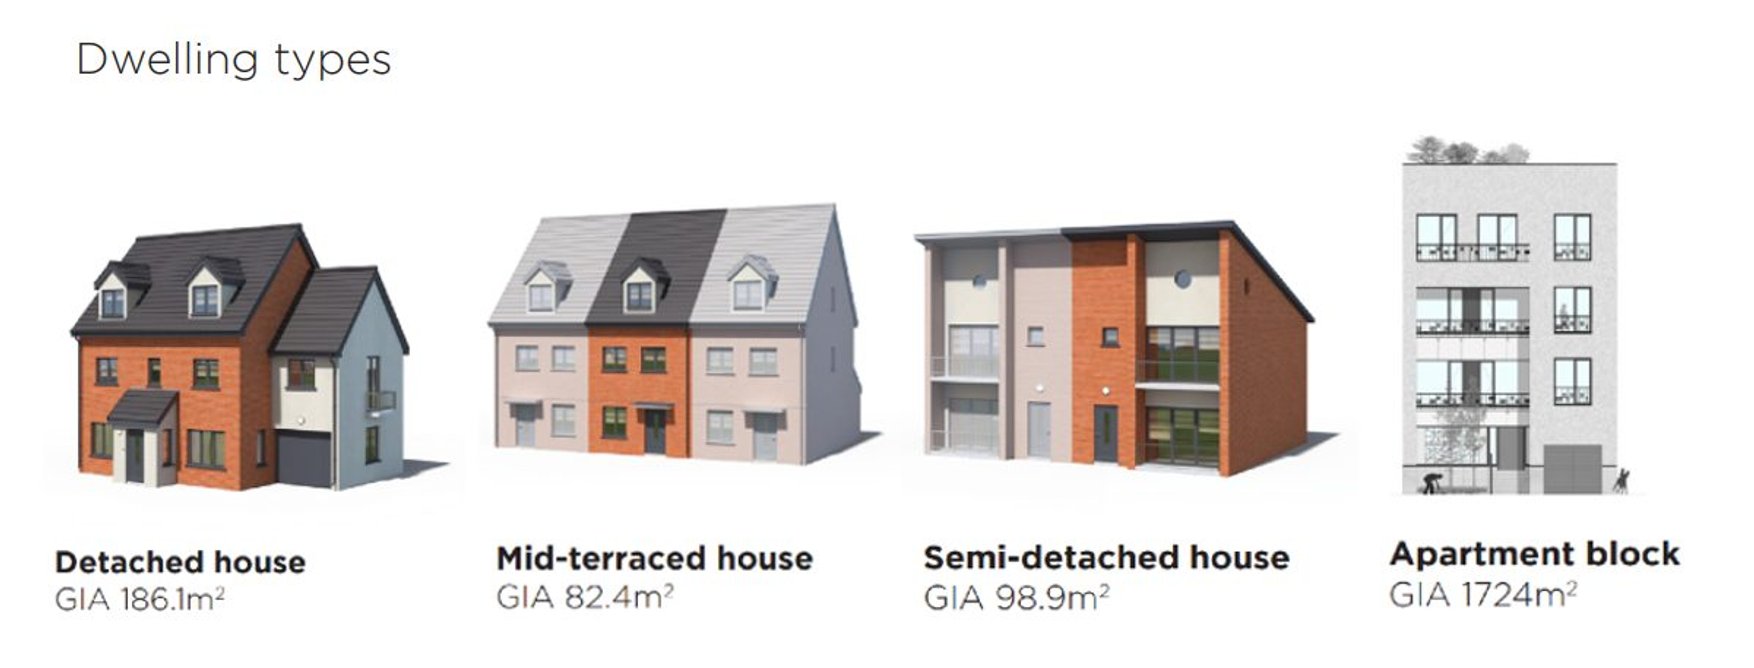 The four dwelling types: The RIBA 2030 Climate Challenge v2 has set a target of 625kgCO2 /m2 for residential buildings.